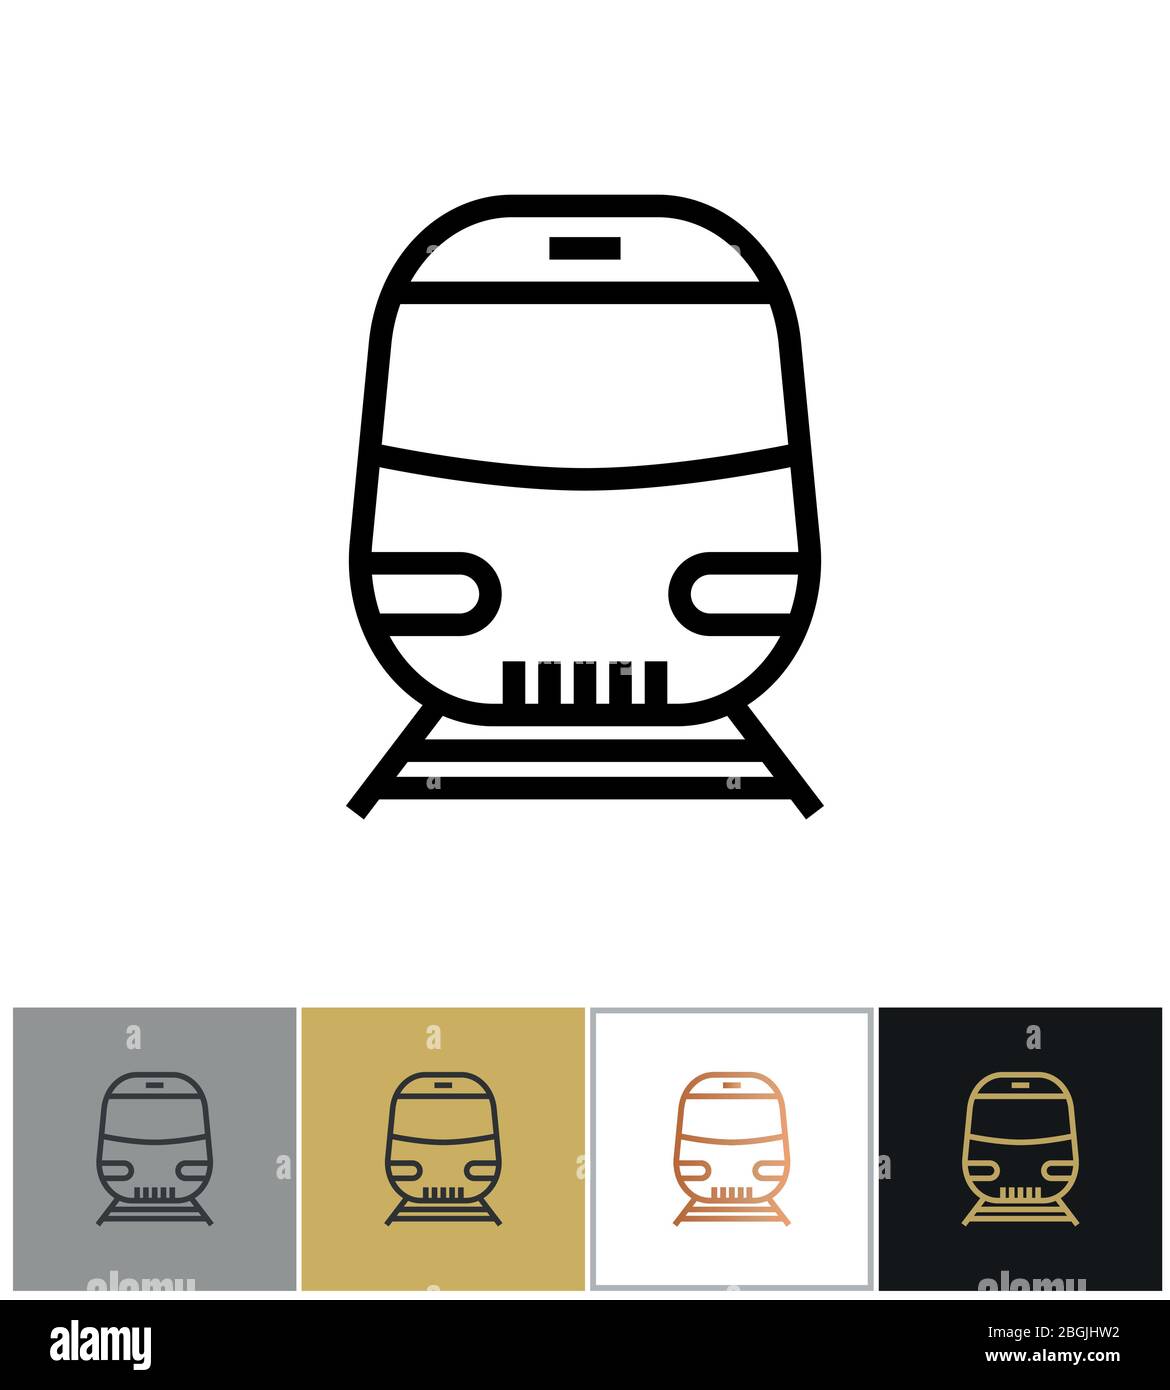 Train icon, railway transport sign or metro station underground railroad symbol on white and black backgrounds. Vector illustration Stock Vector